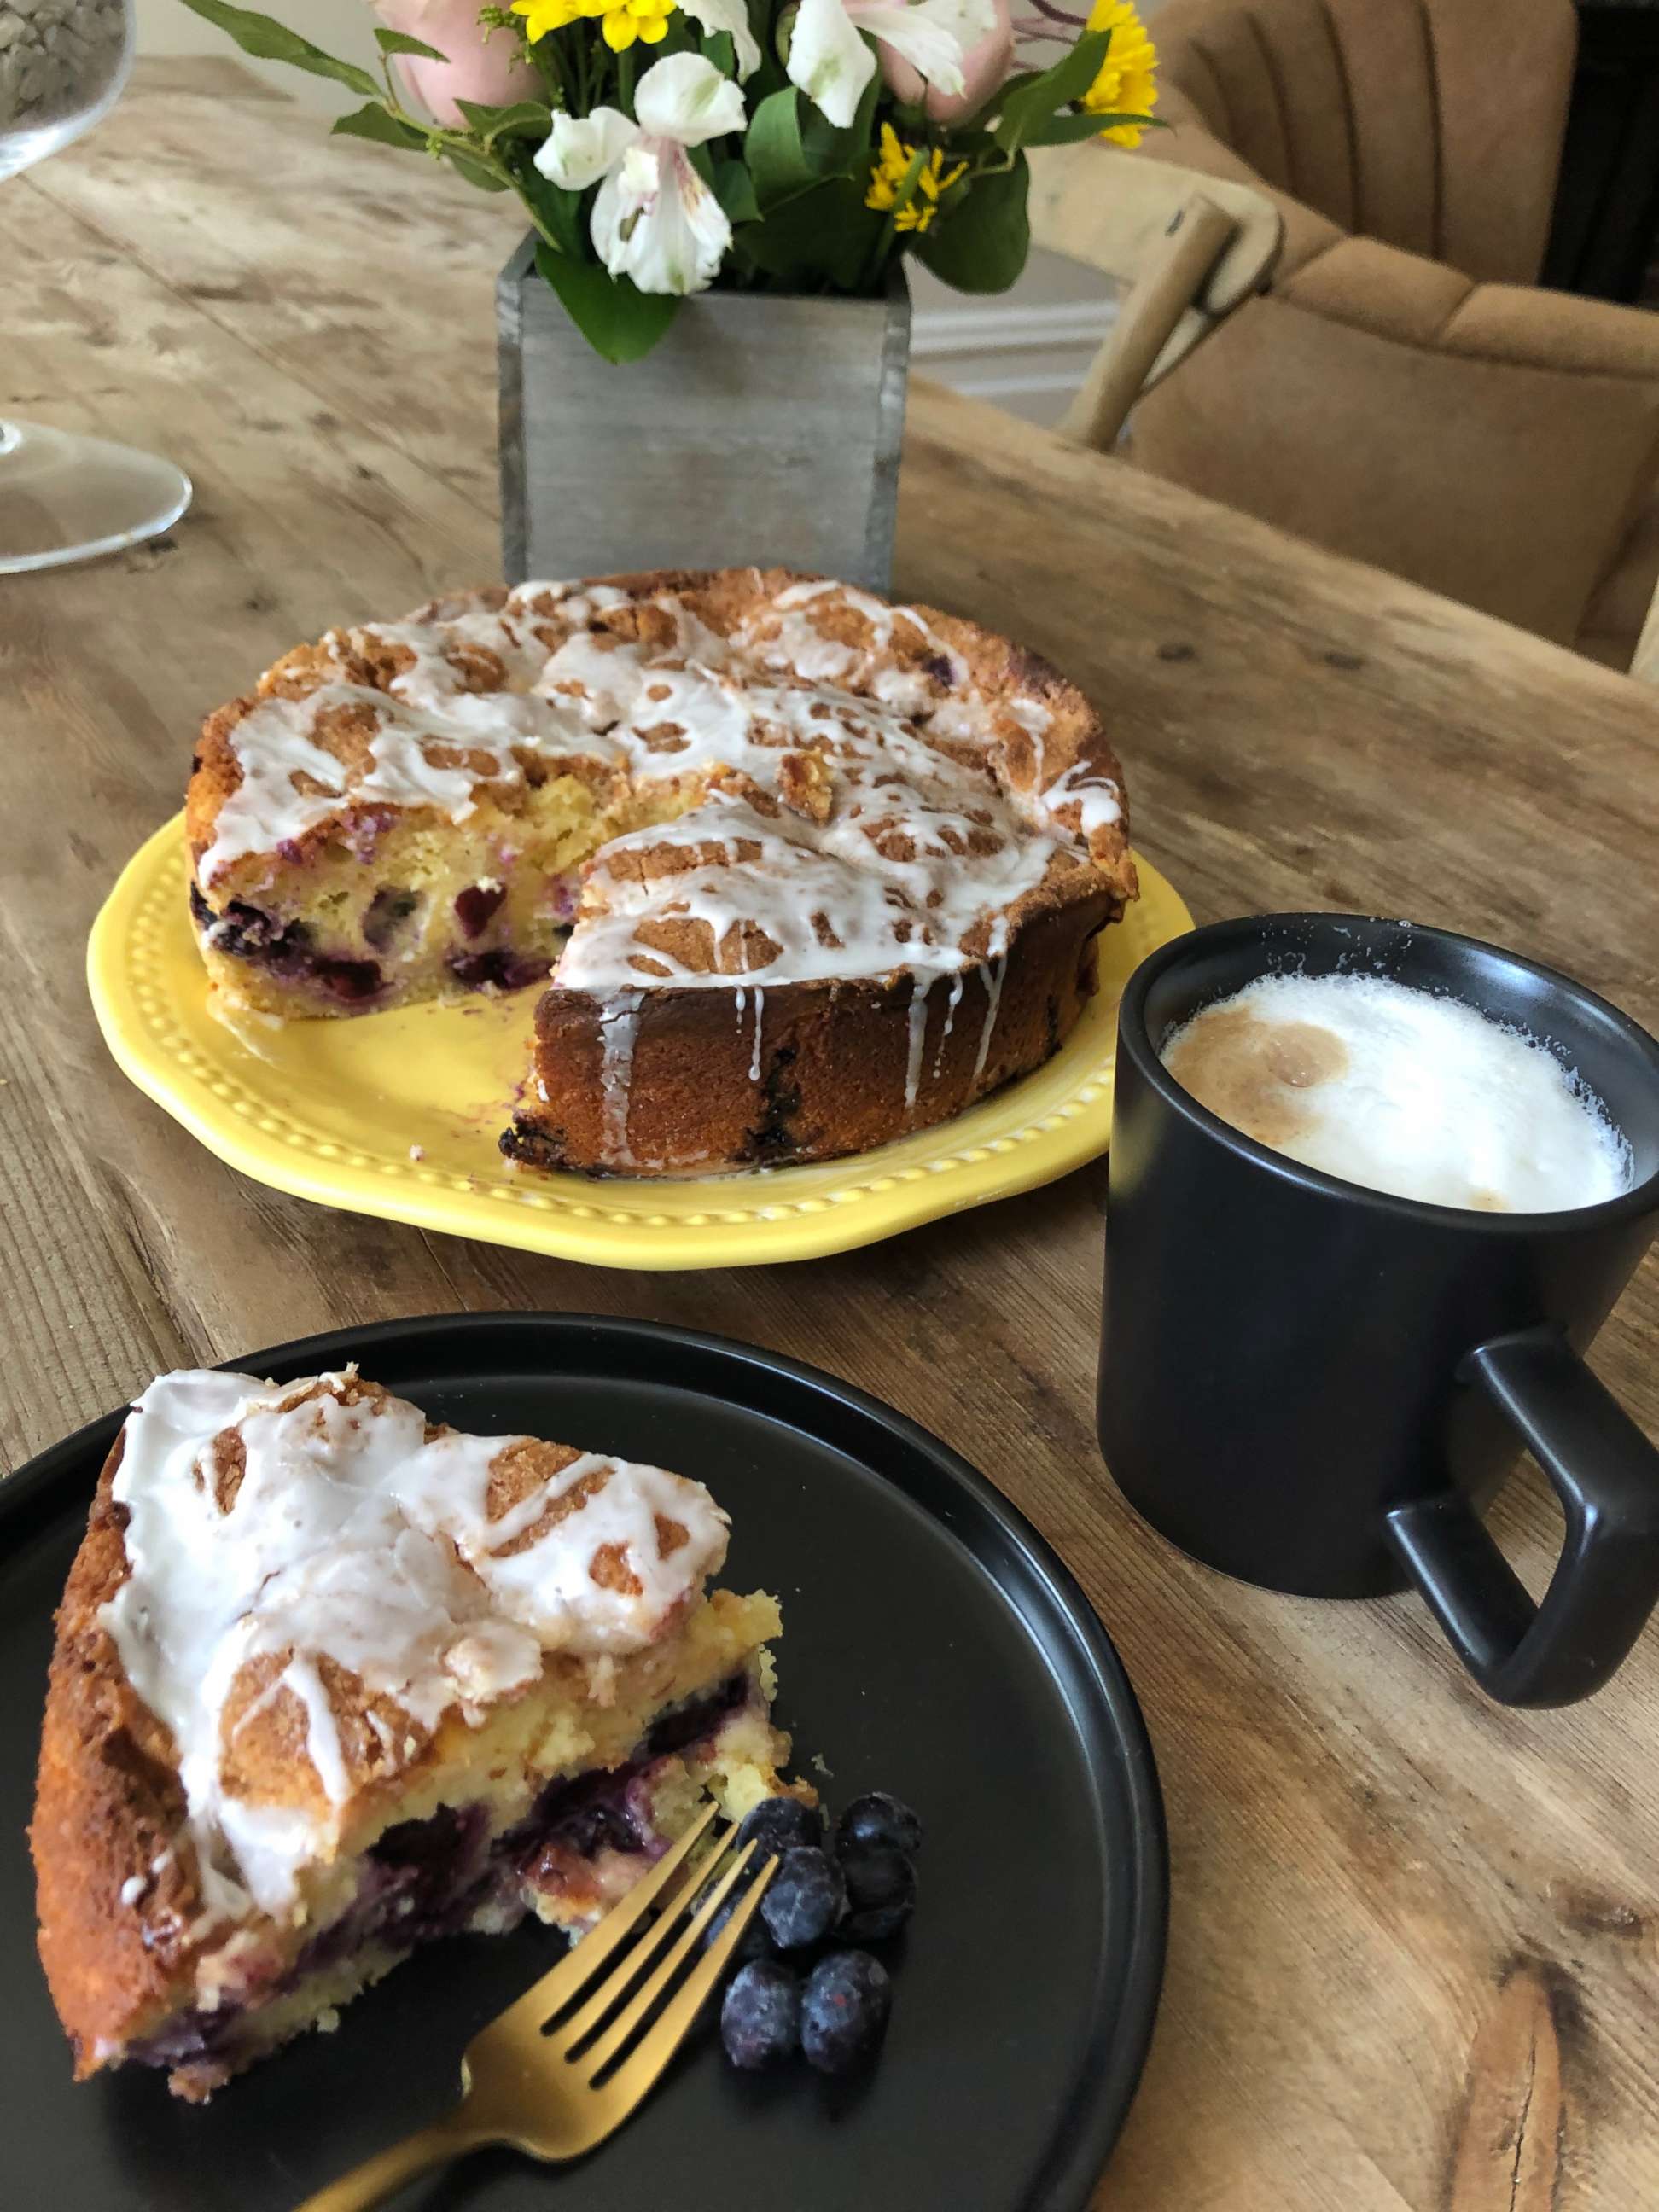 PHOTO: A lemon blueberry coffee cake made by Millie Peartree.